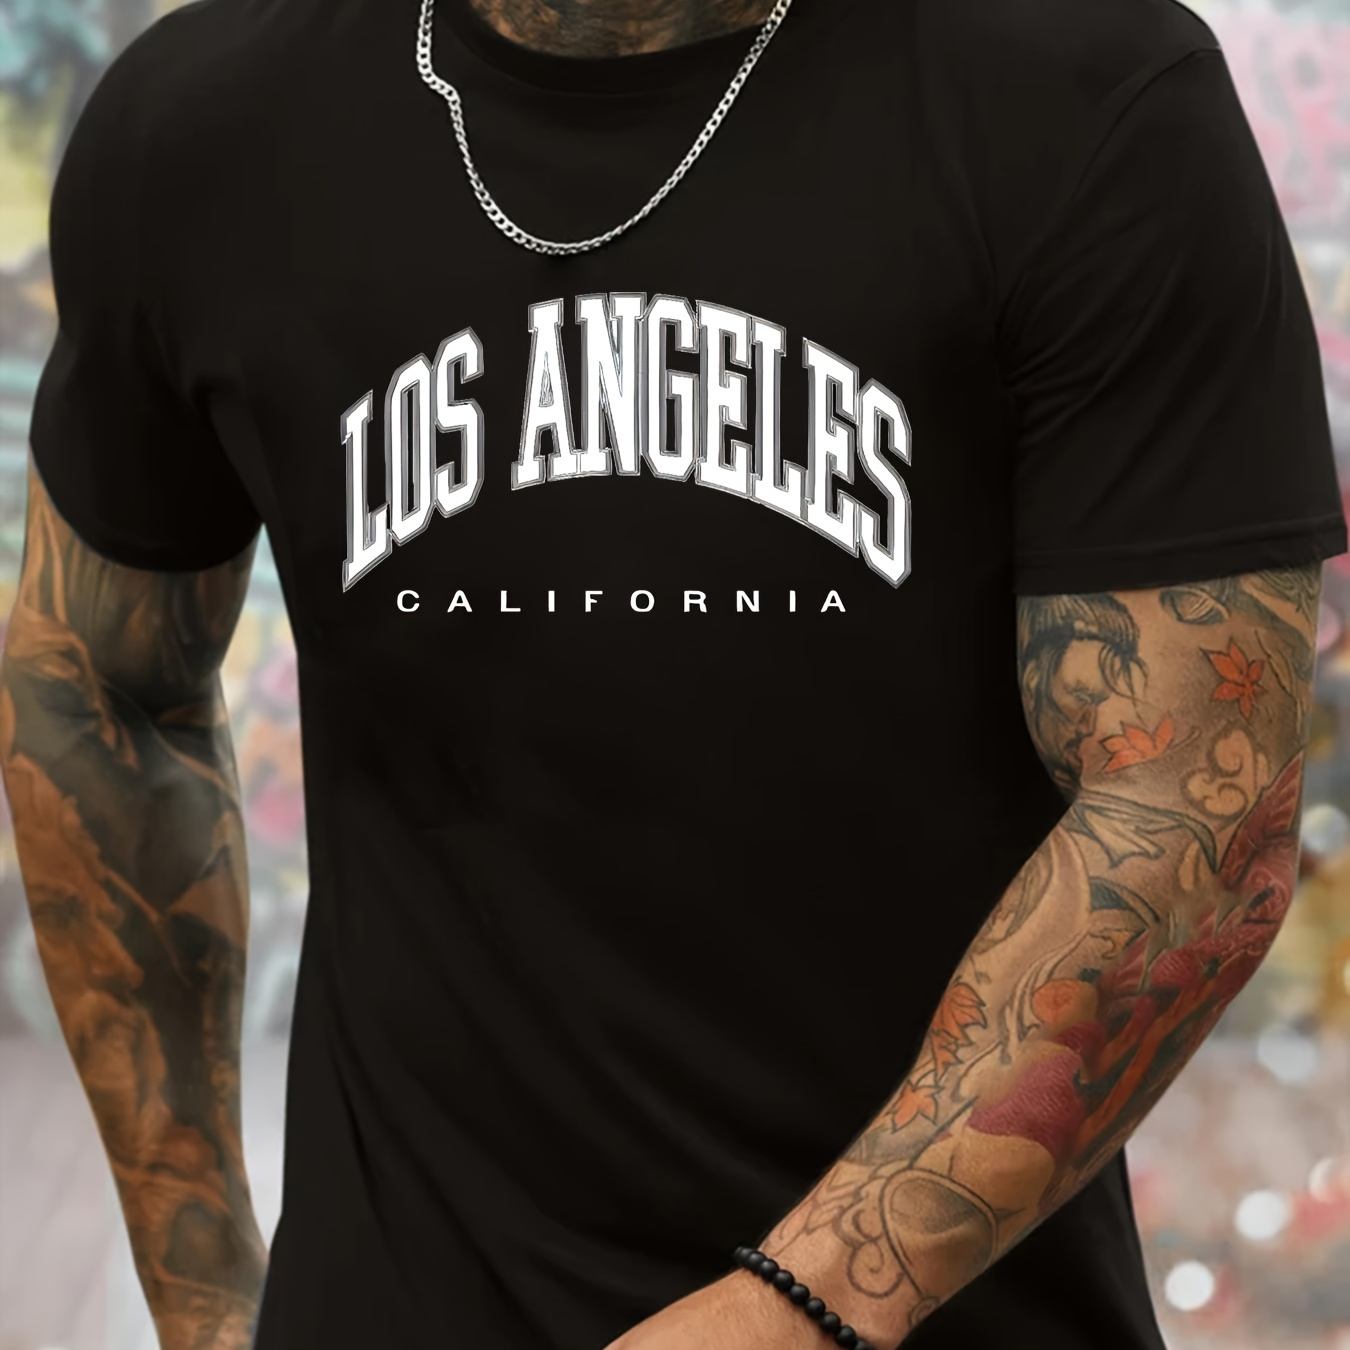 

Los Angeles Graphic Men's Short Sleeve T-shirt, Comfy Stretchy Trendy Tees For Summer, Casual Daily Style Fashion Clothing